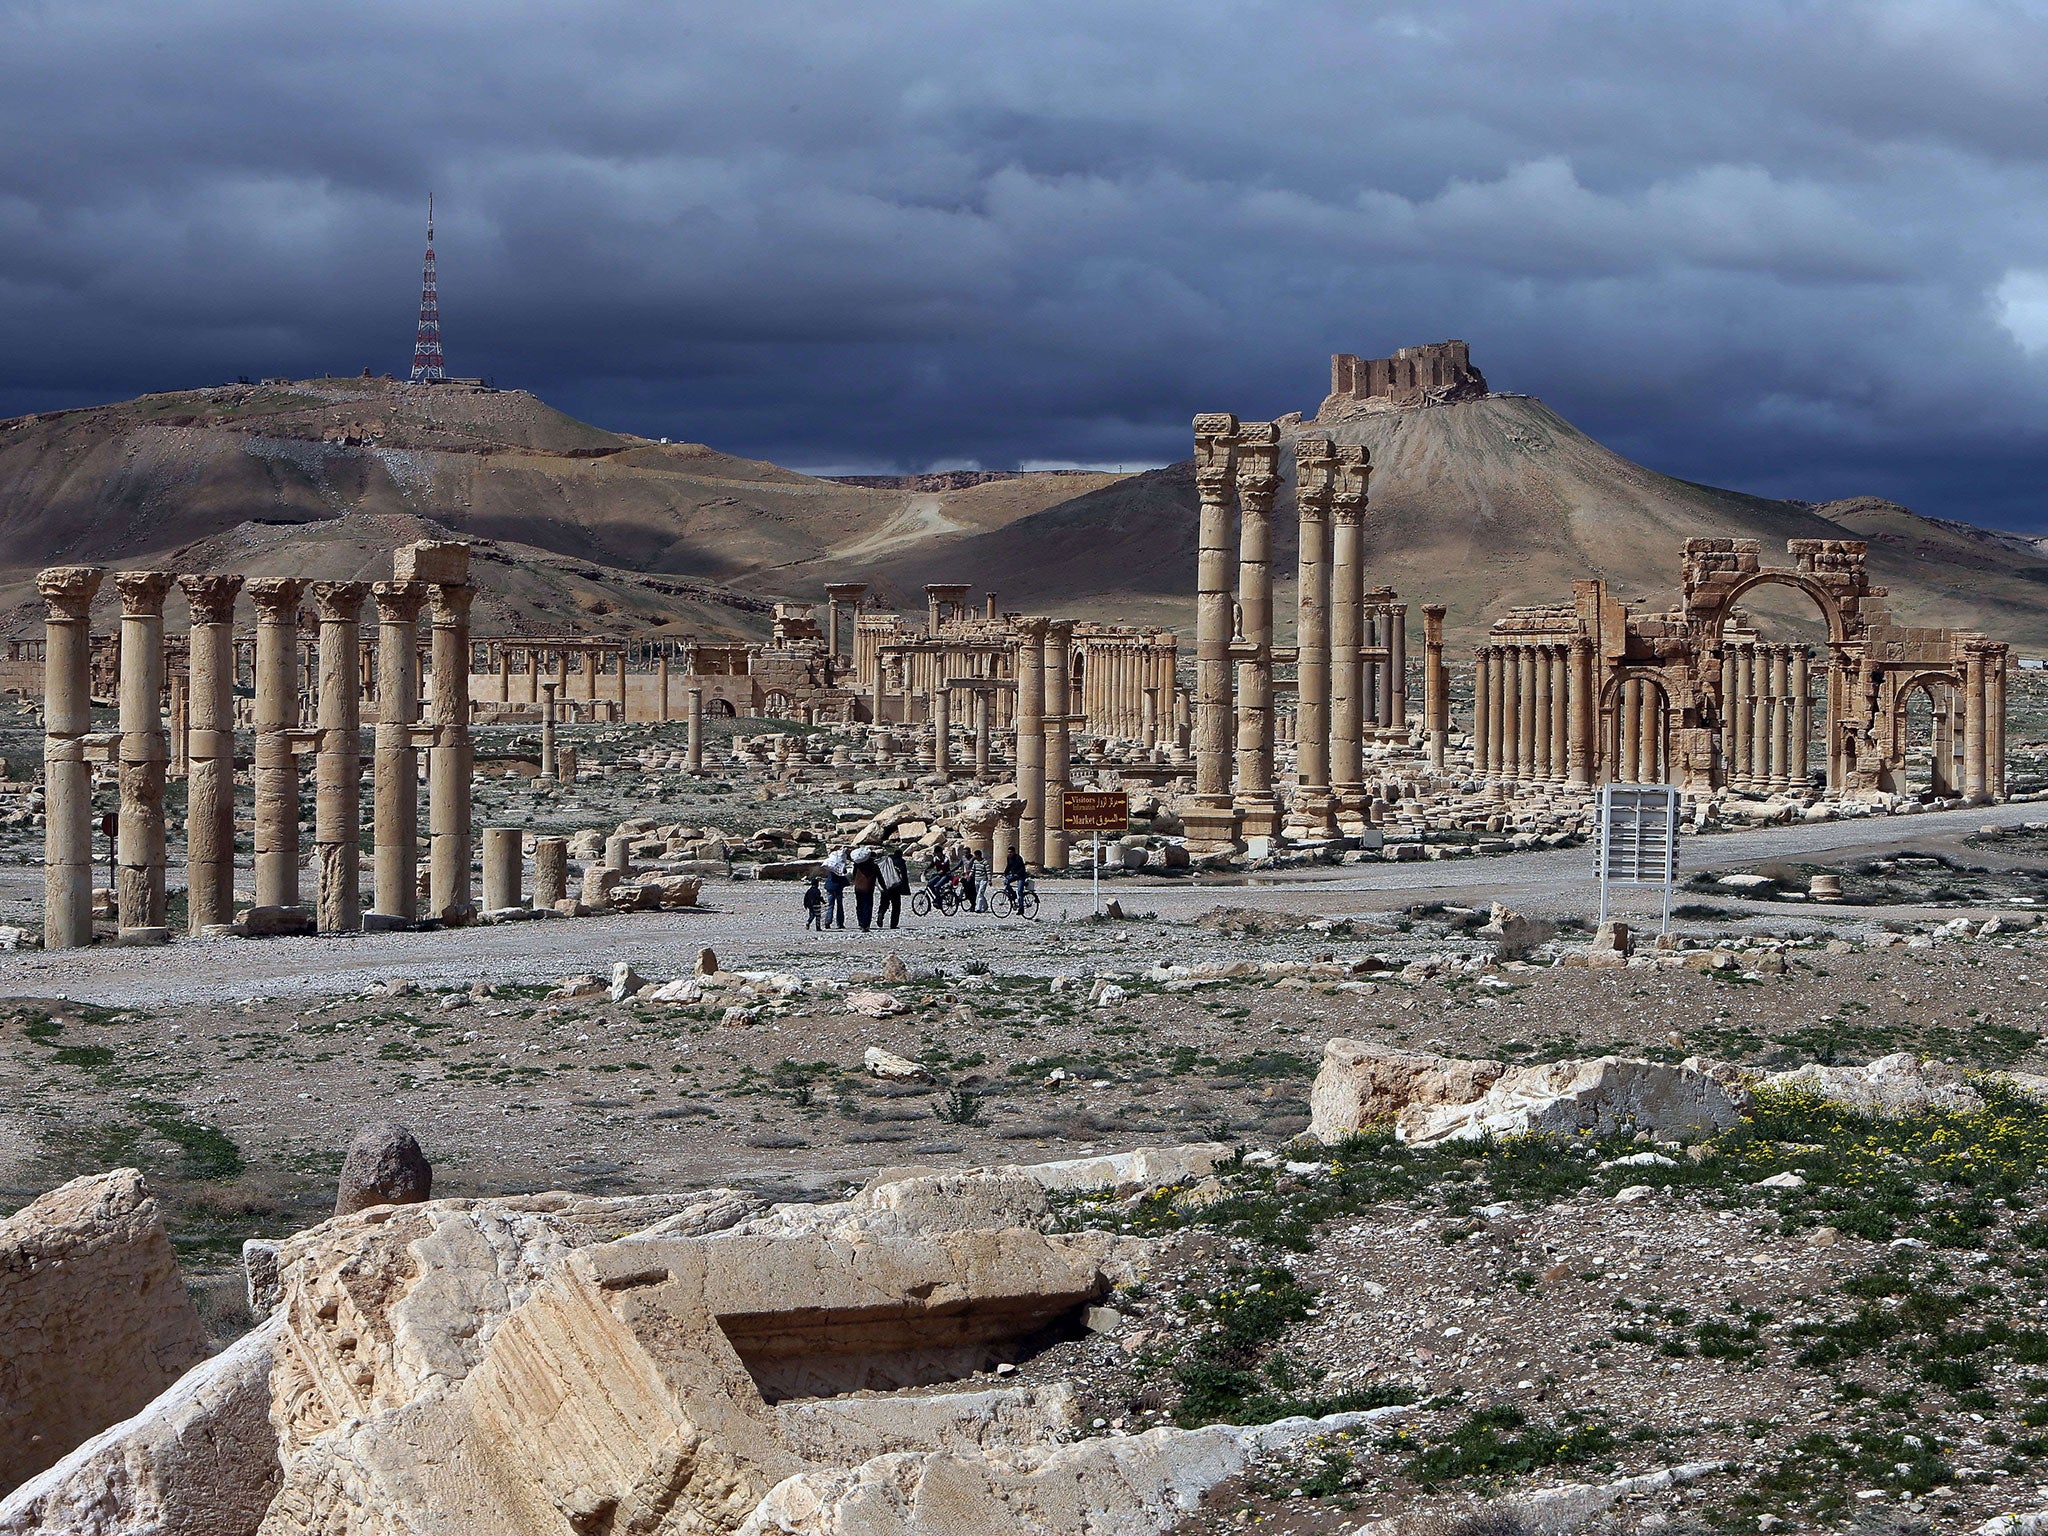 Isis seized the citadel and columns of the ancient oasis city of Palmyra, 133 miles north-east of Damascus